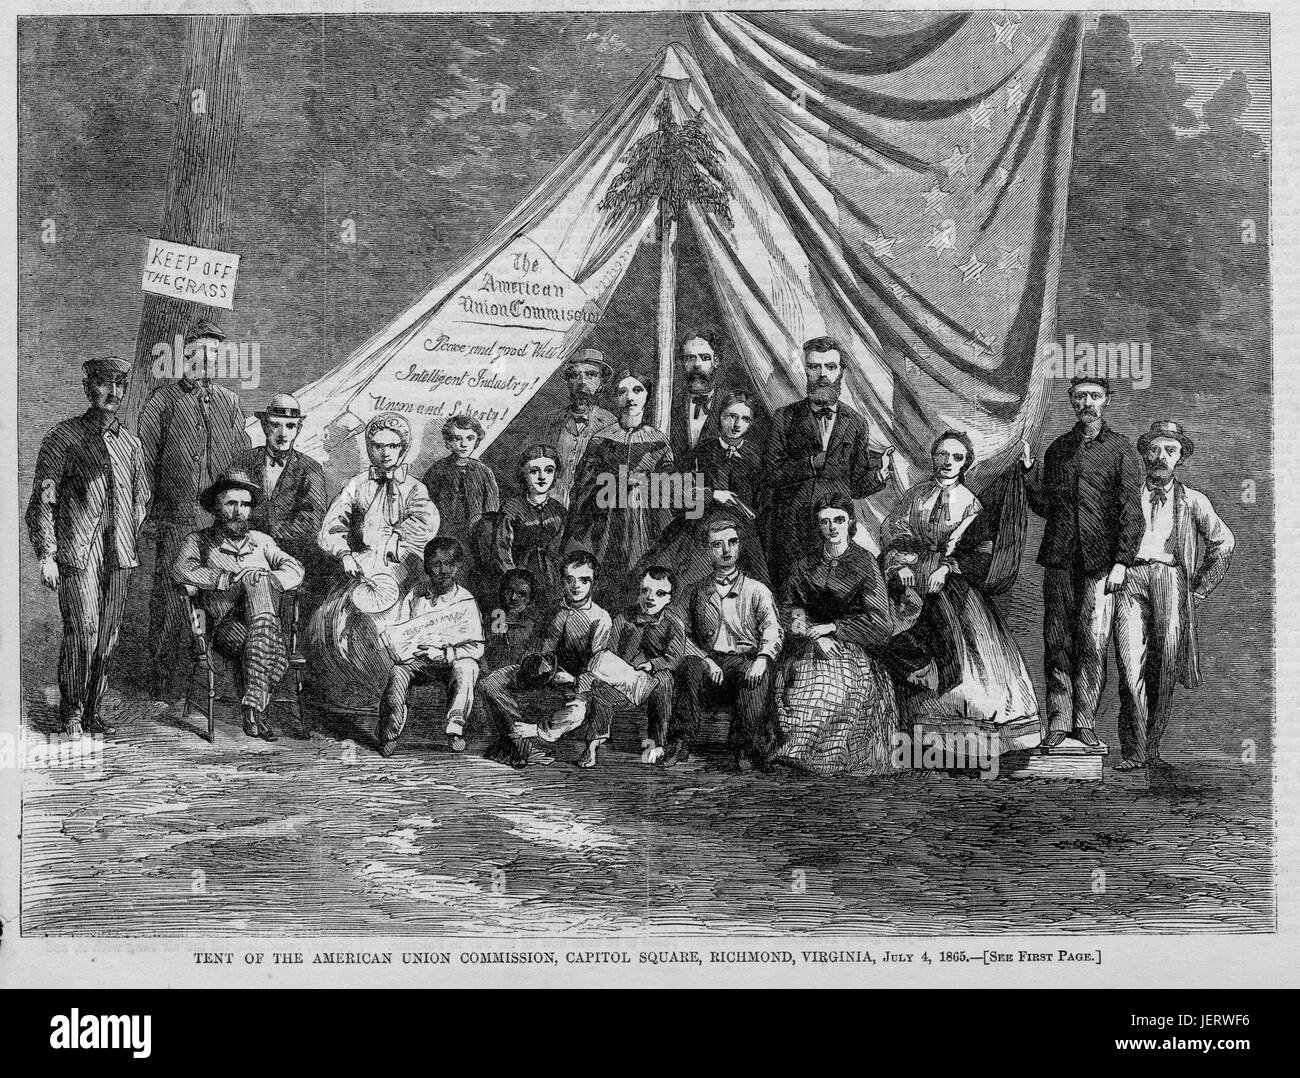 Tent of the American Union Commision, Capitol Square, Richmond, Virginia, July 4, 1865 Stock Photo